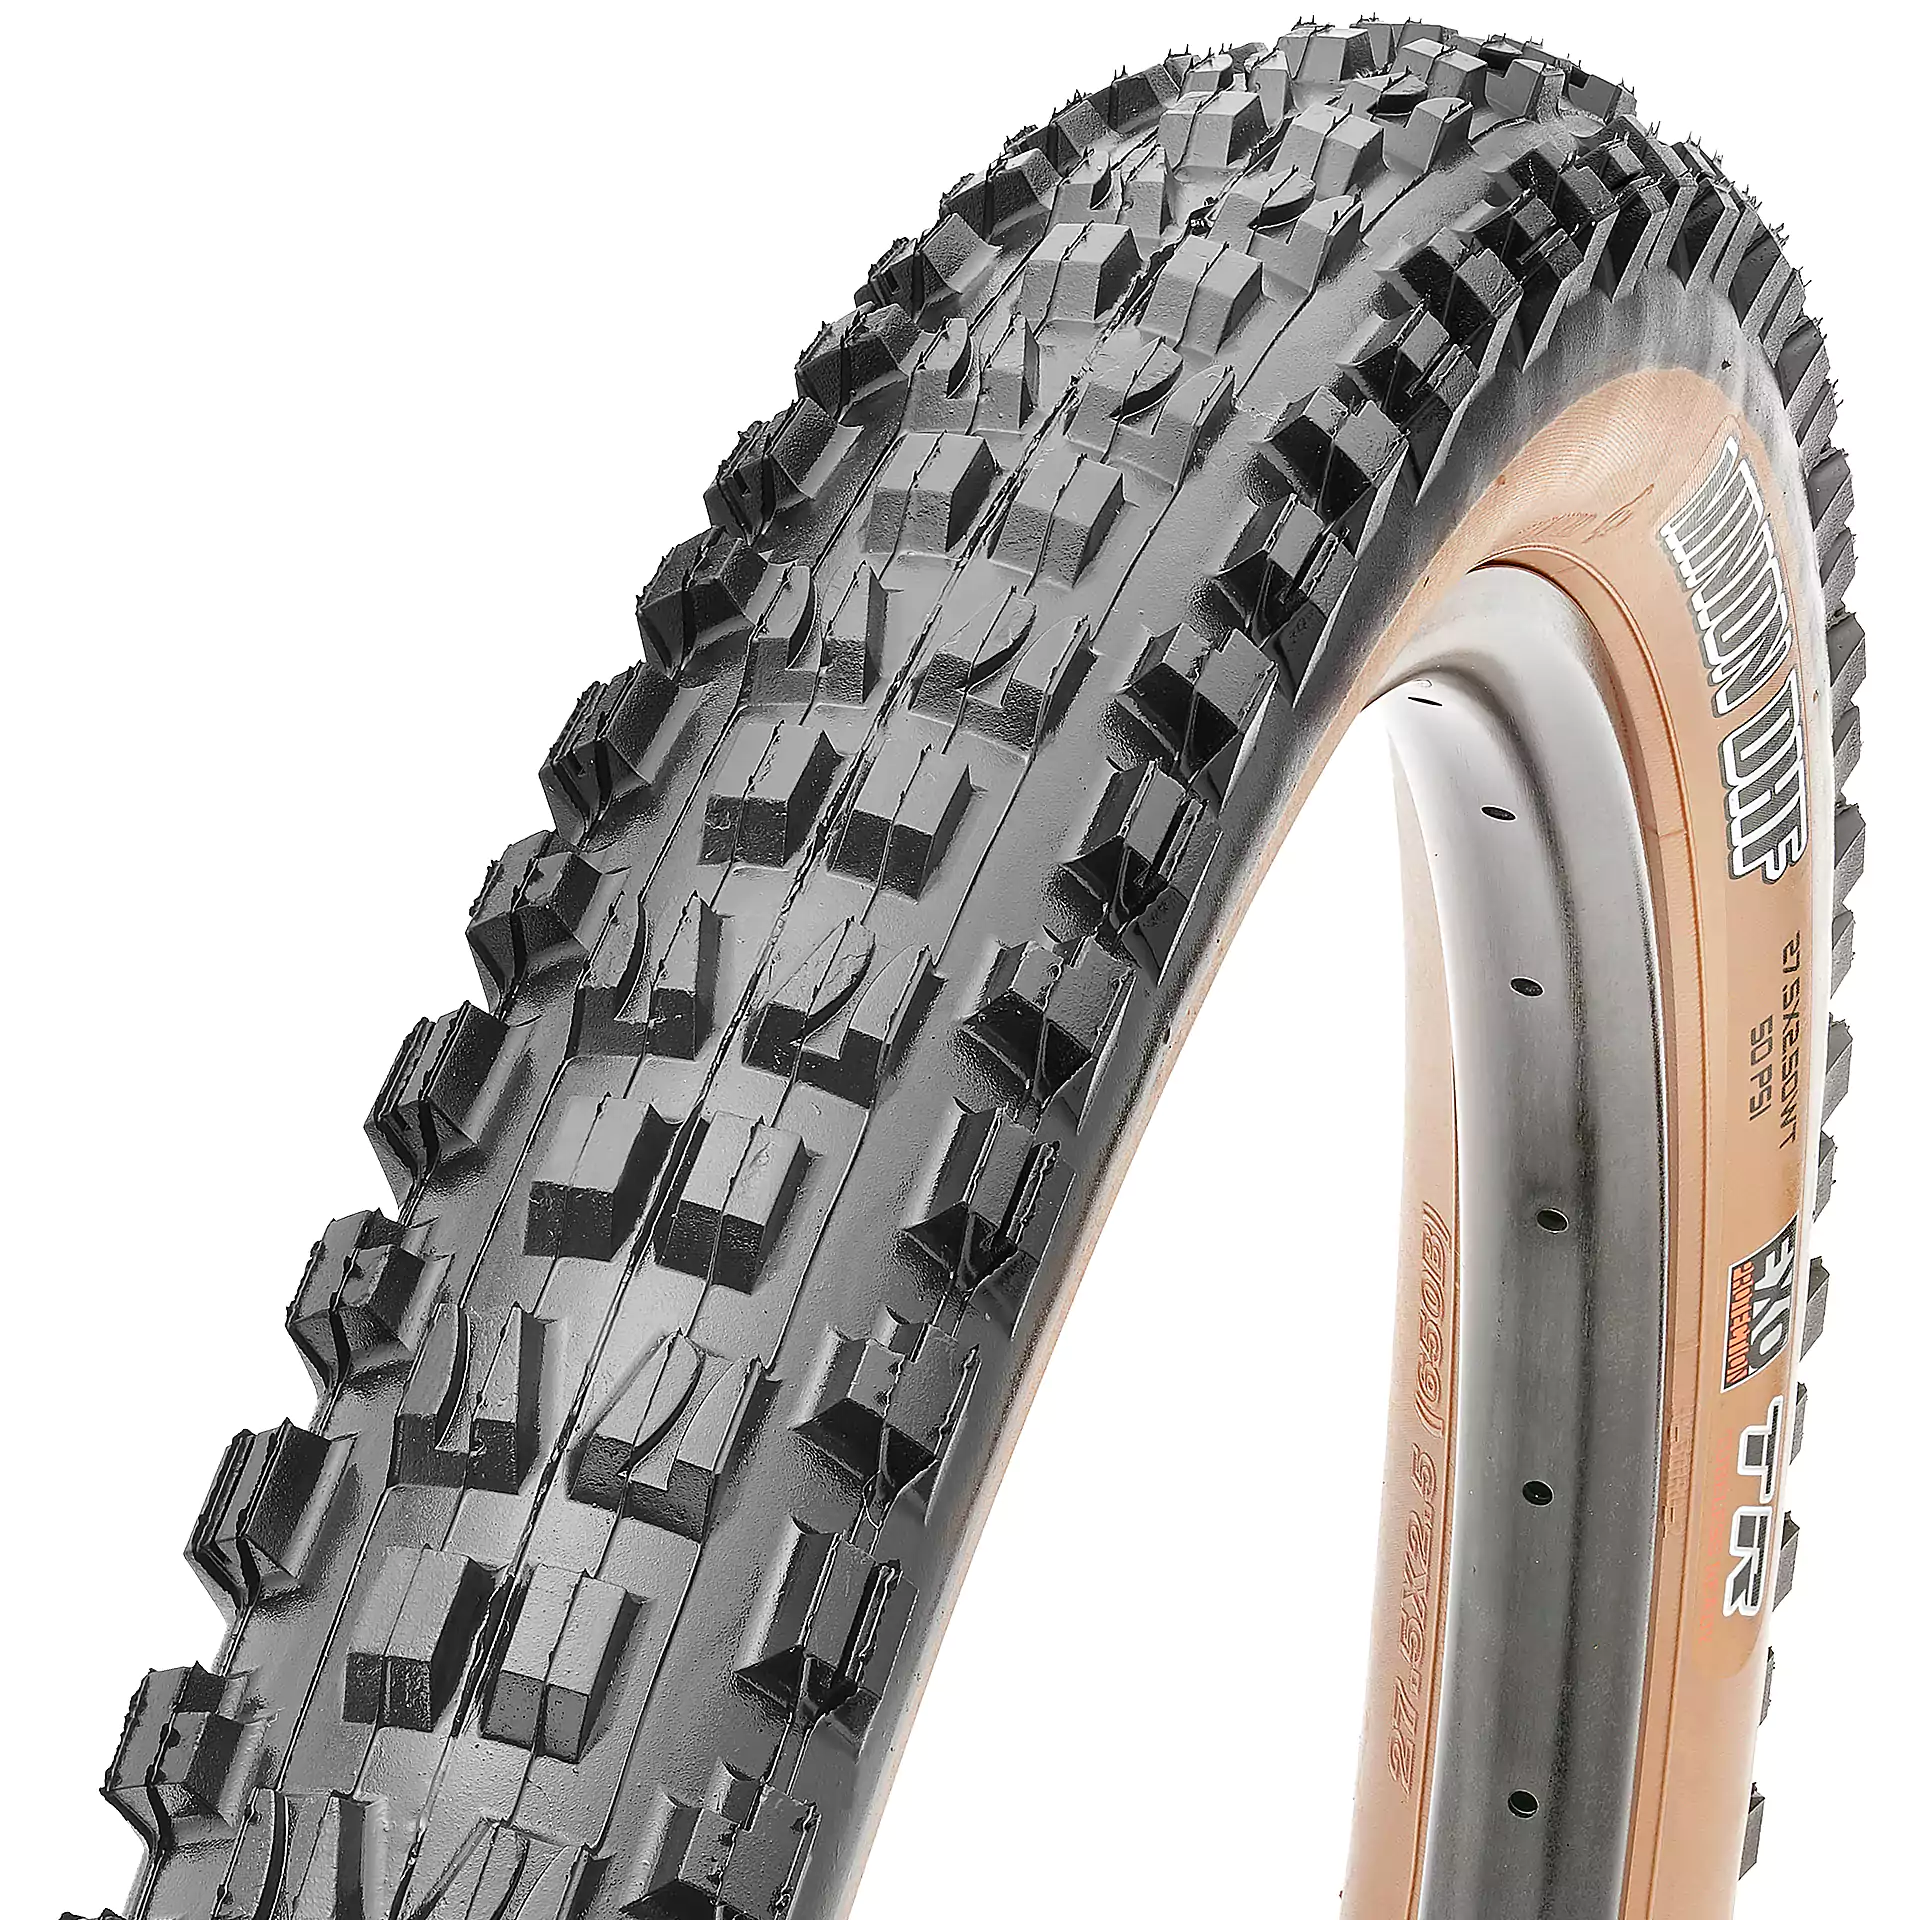 Maxxis Minion DHF 27.5 x 2.5 60tpi Dual EXO Puncture Protection Tubeless Ready